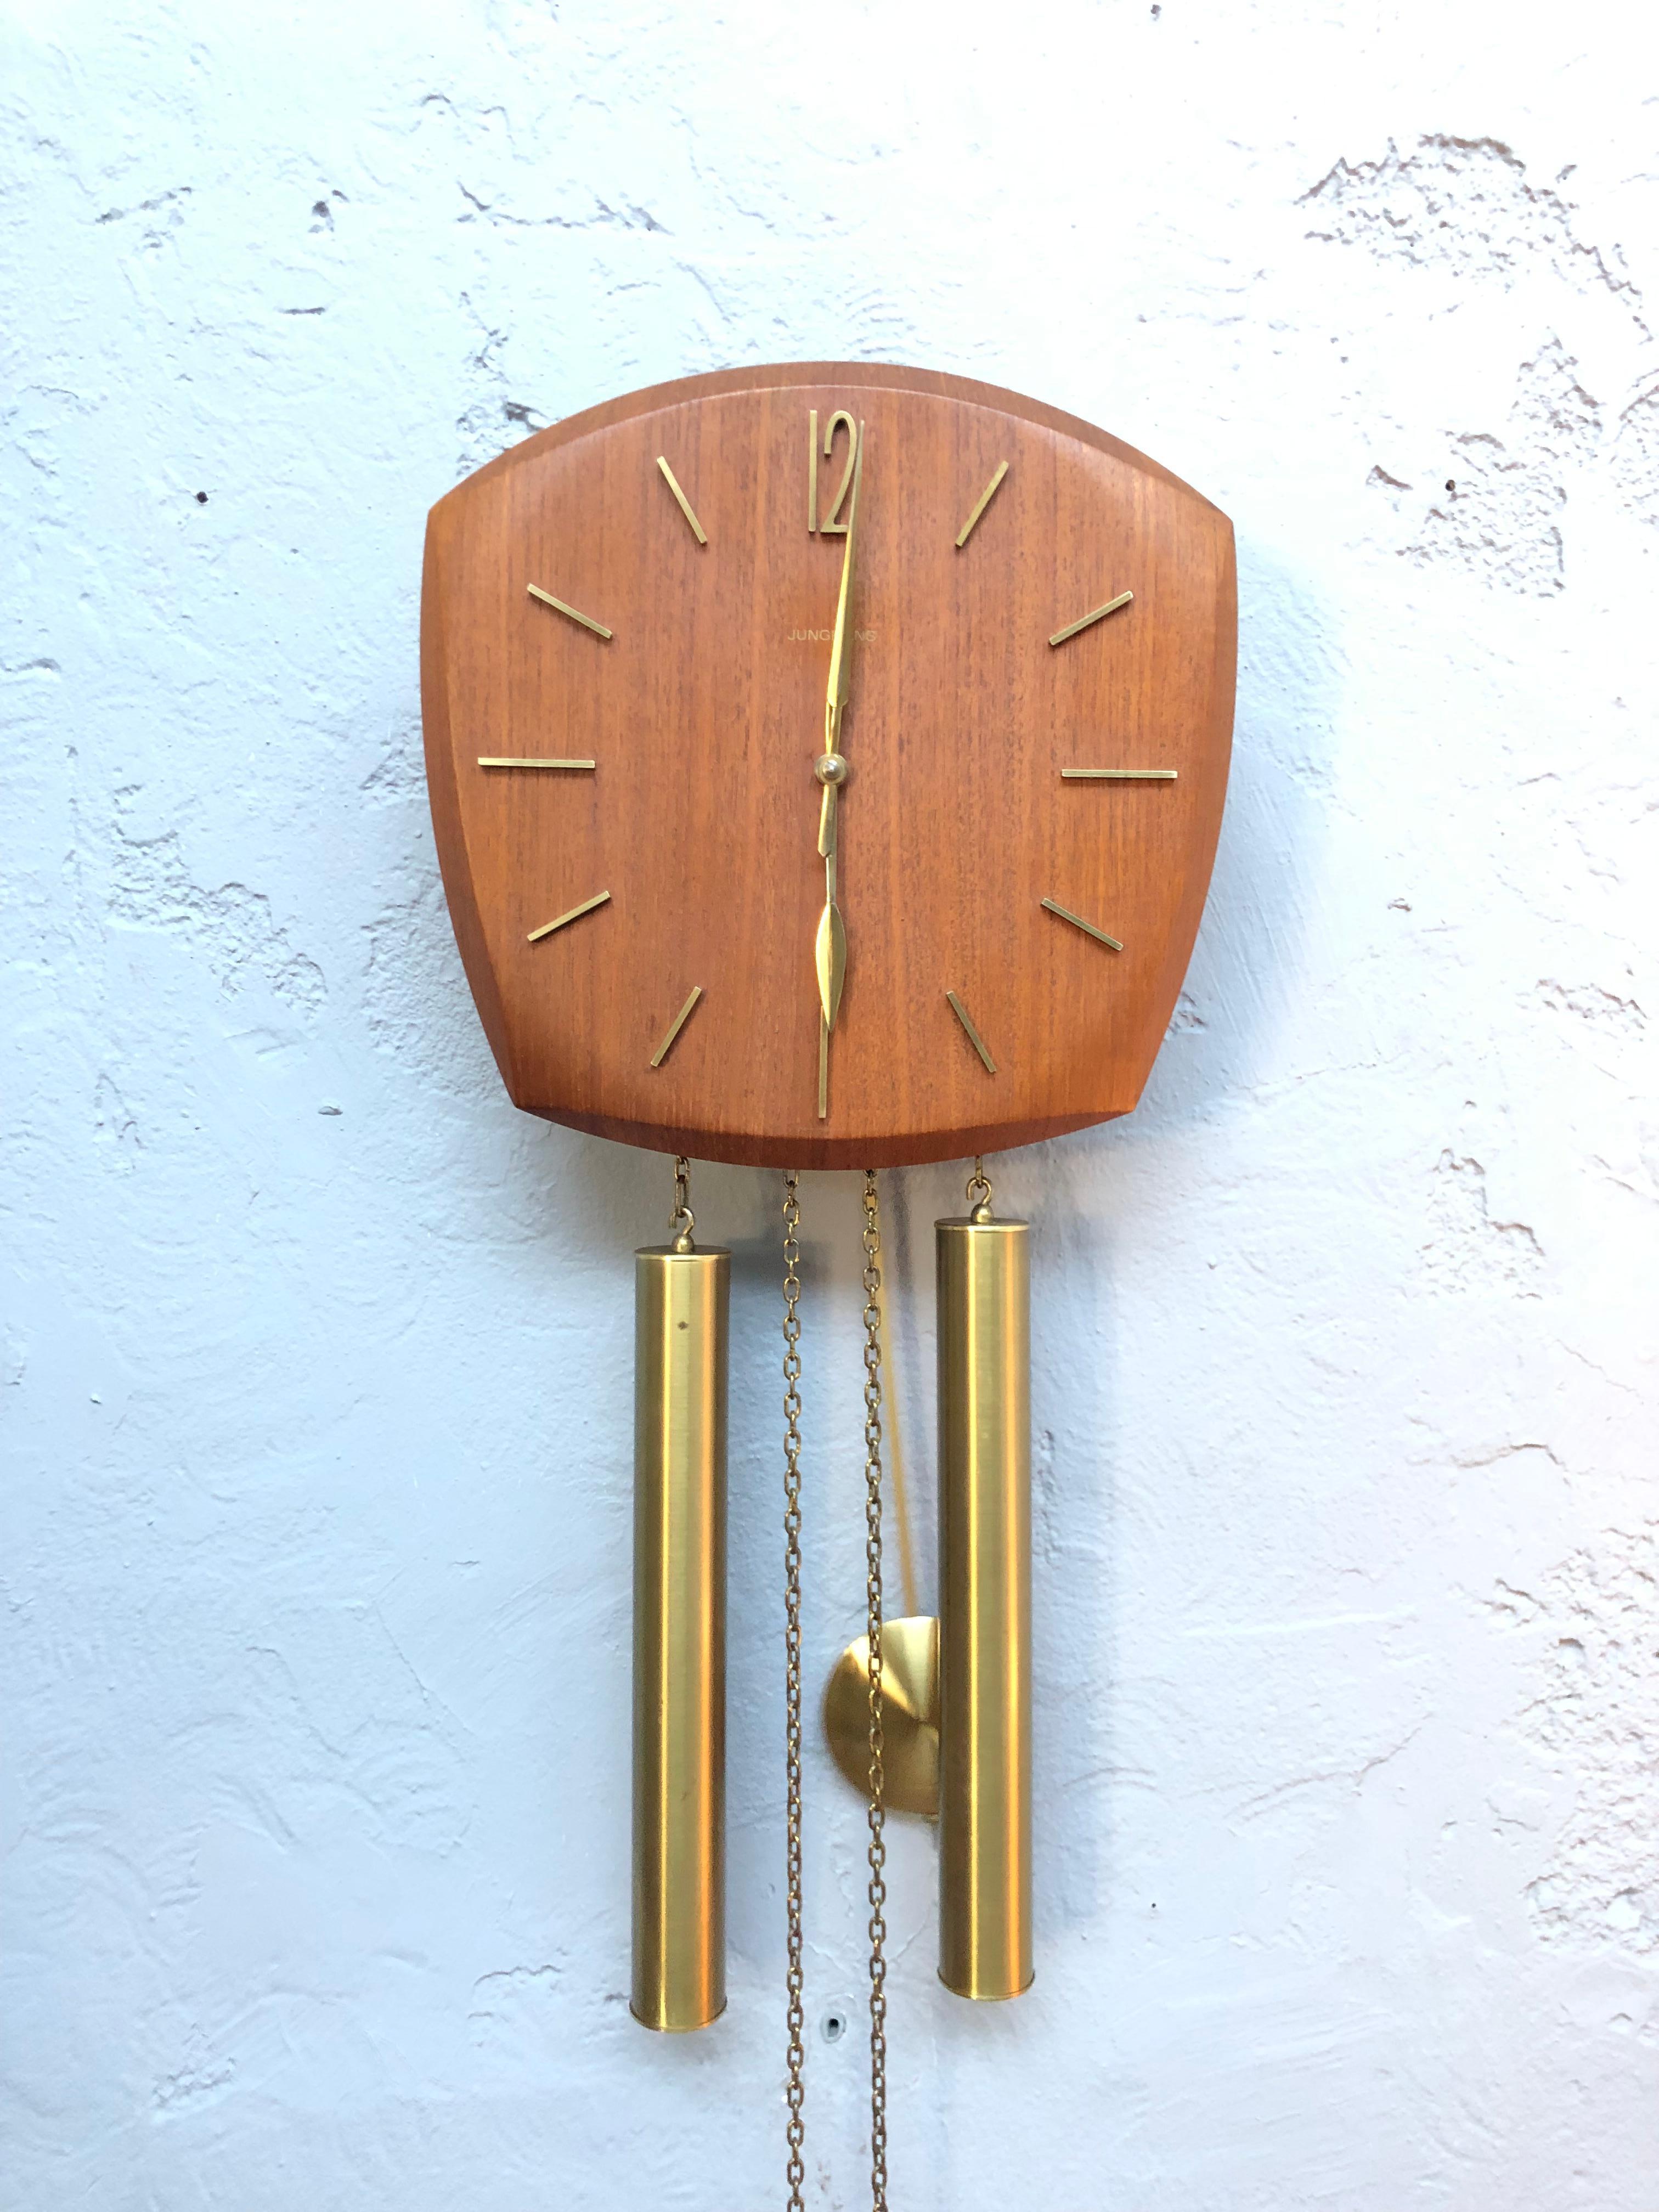 Vintage Junghans pendulum wall clock from the 1960s in oak veneer with brass fittings.
In lovely working condition and with chimes on the half and whole hour that can be switched off if so desired.
A very clean pendulum clock that has been running